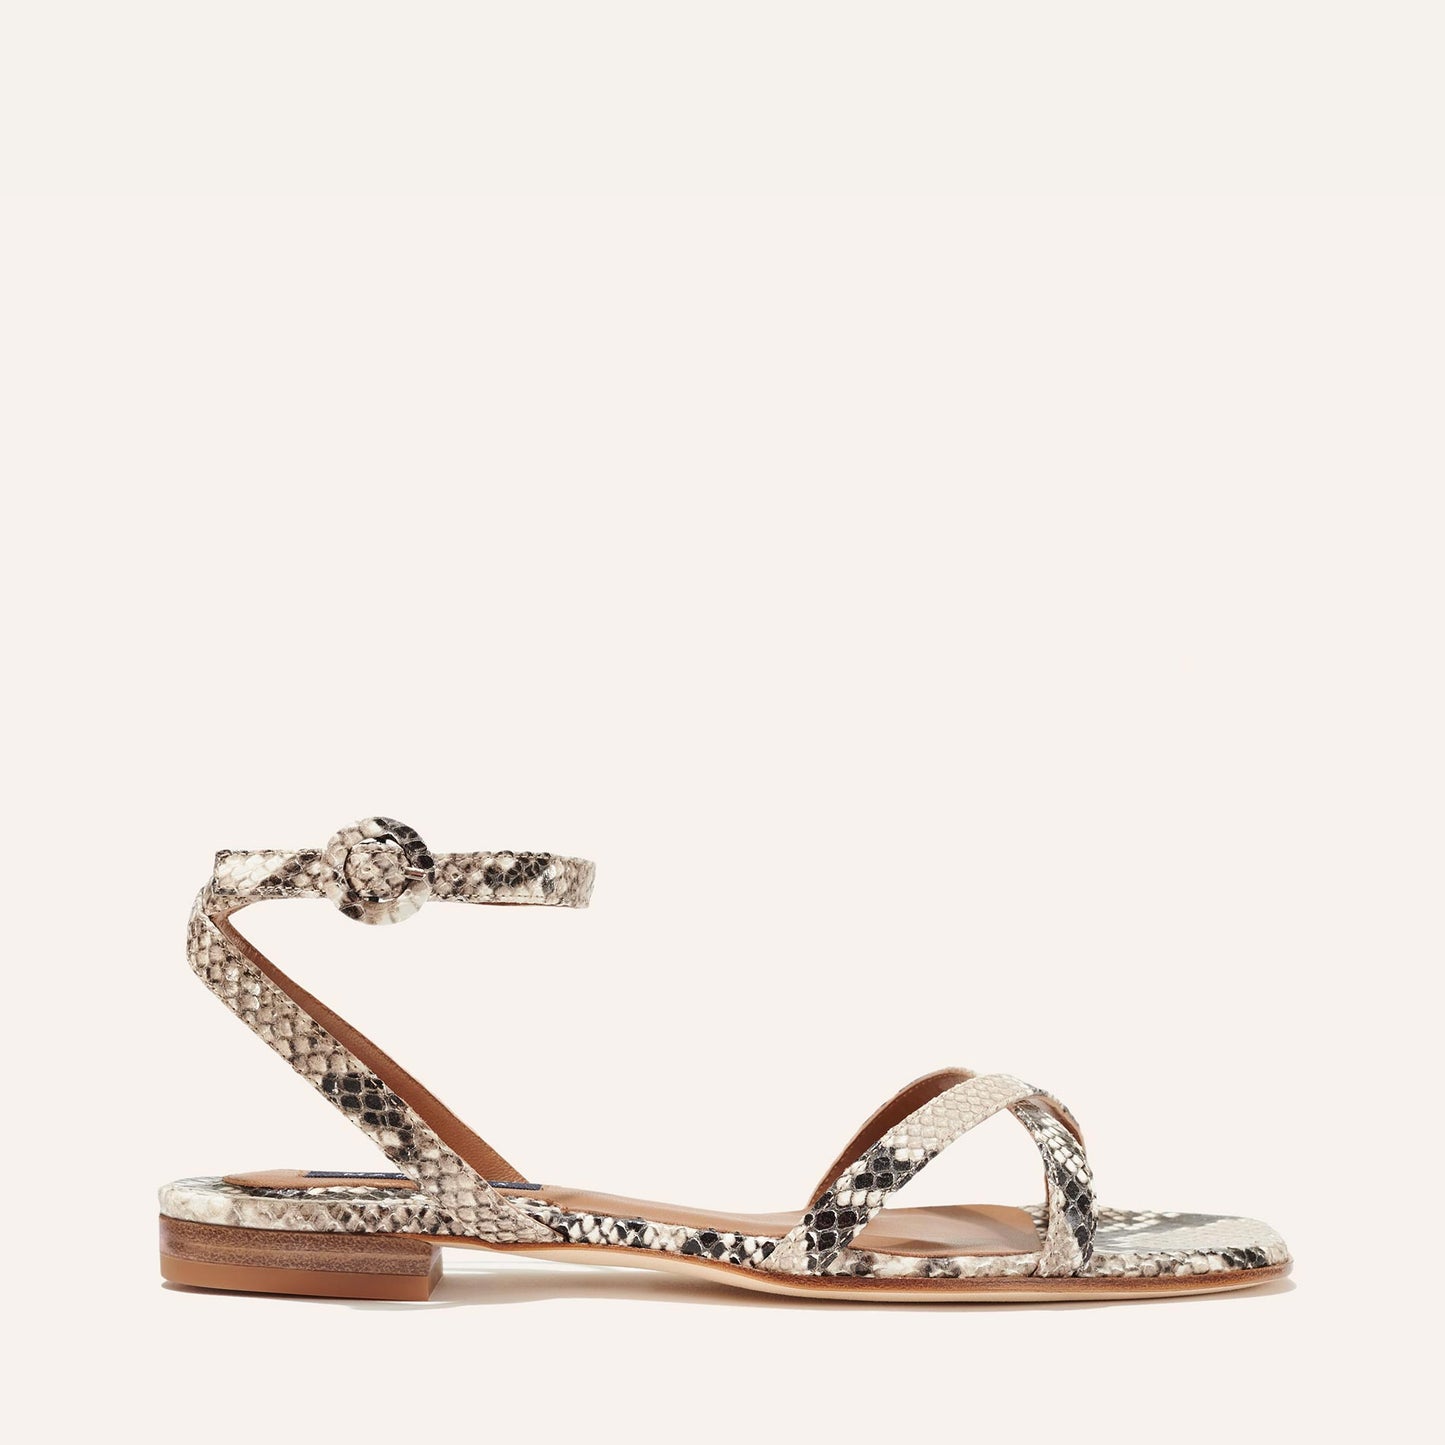 Margaux's classic and comfortable Flat Sandal, made in Spain from python-embossed Italian leather